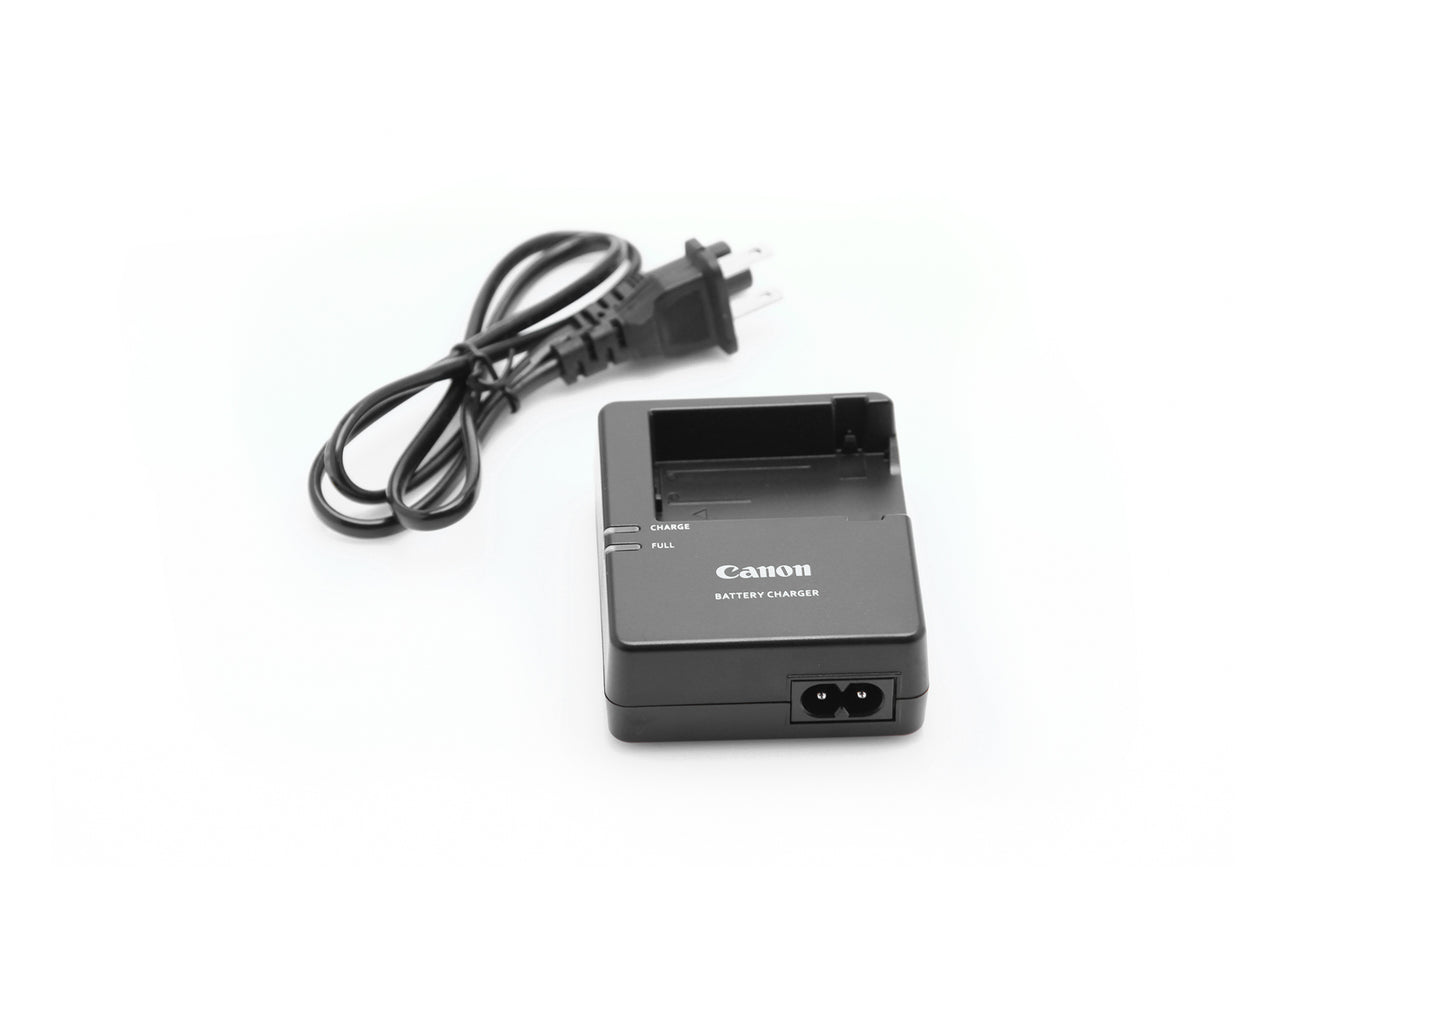 Camera Battery Charger For CANON (LC-E8C,LCE8C,550D,600D,Rebel T2i,T3i,LP-E8,LPE8)